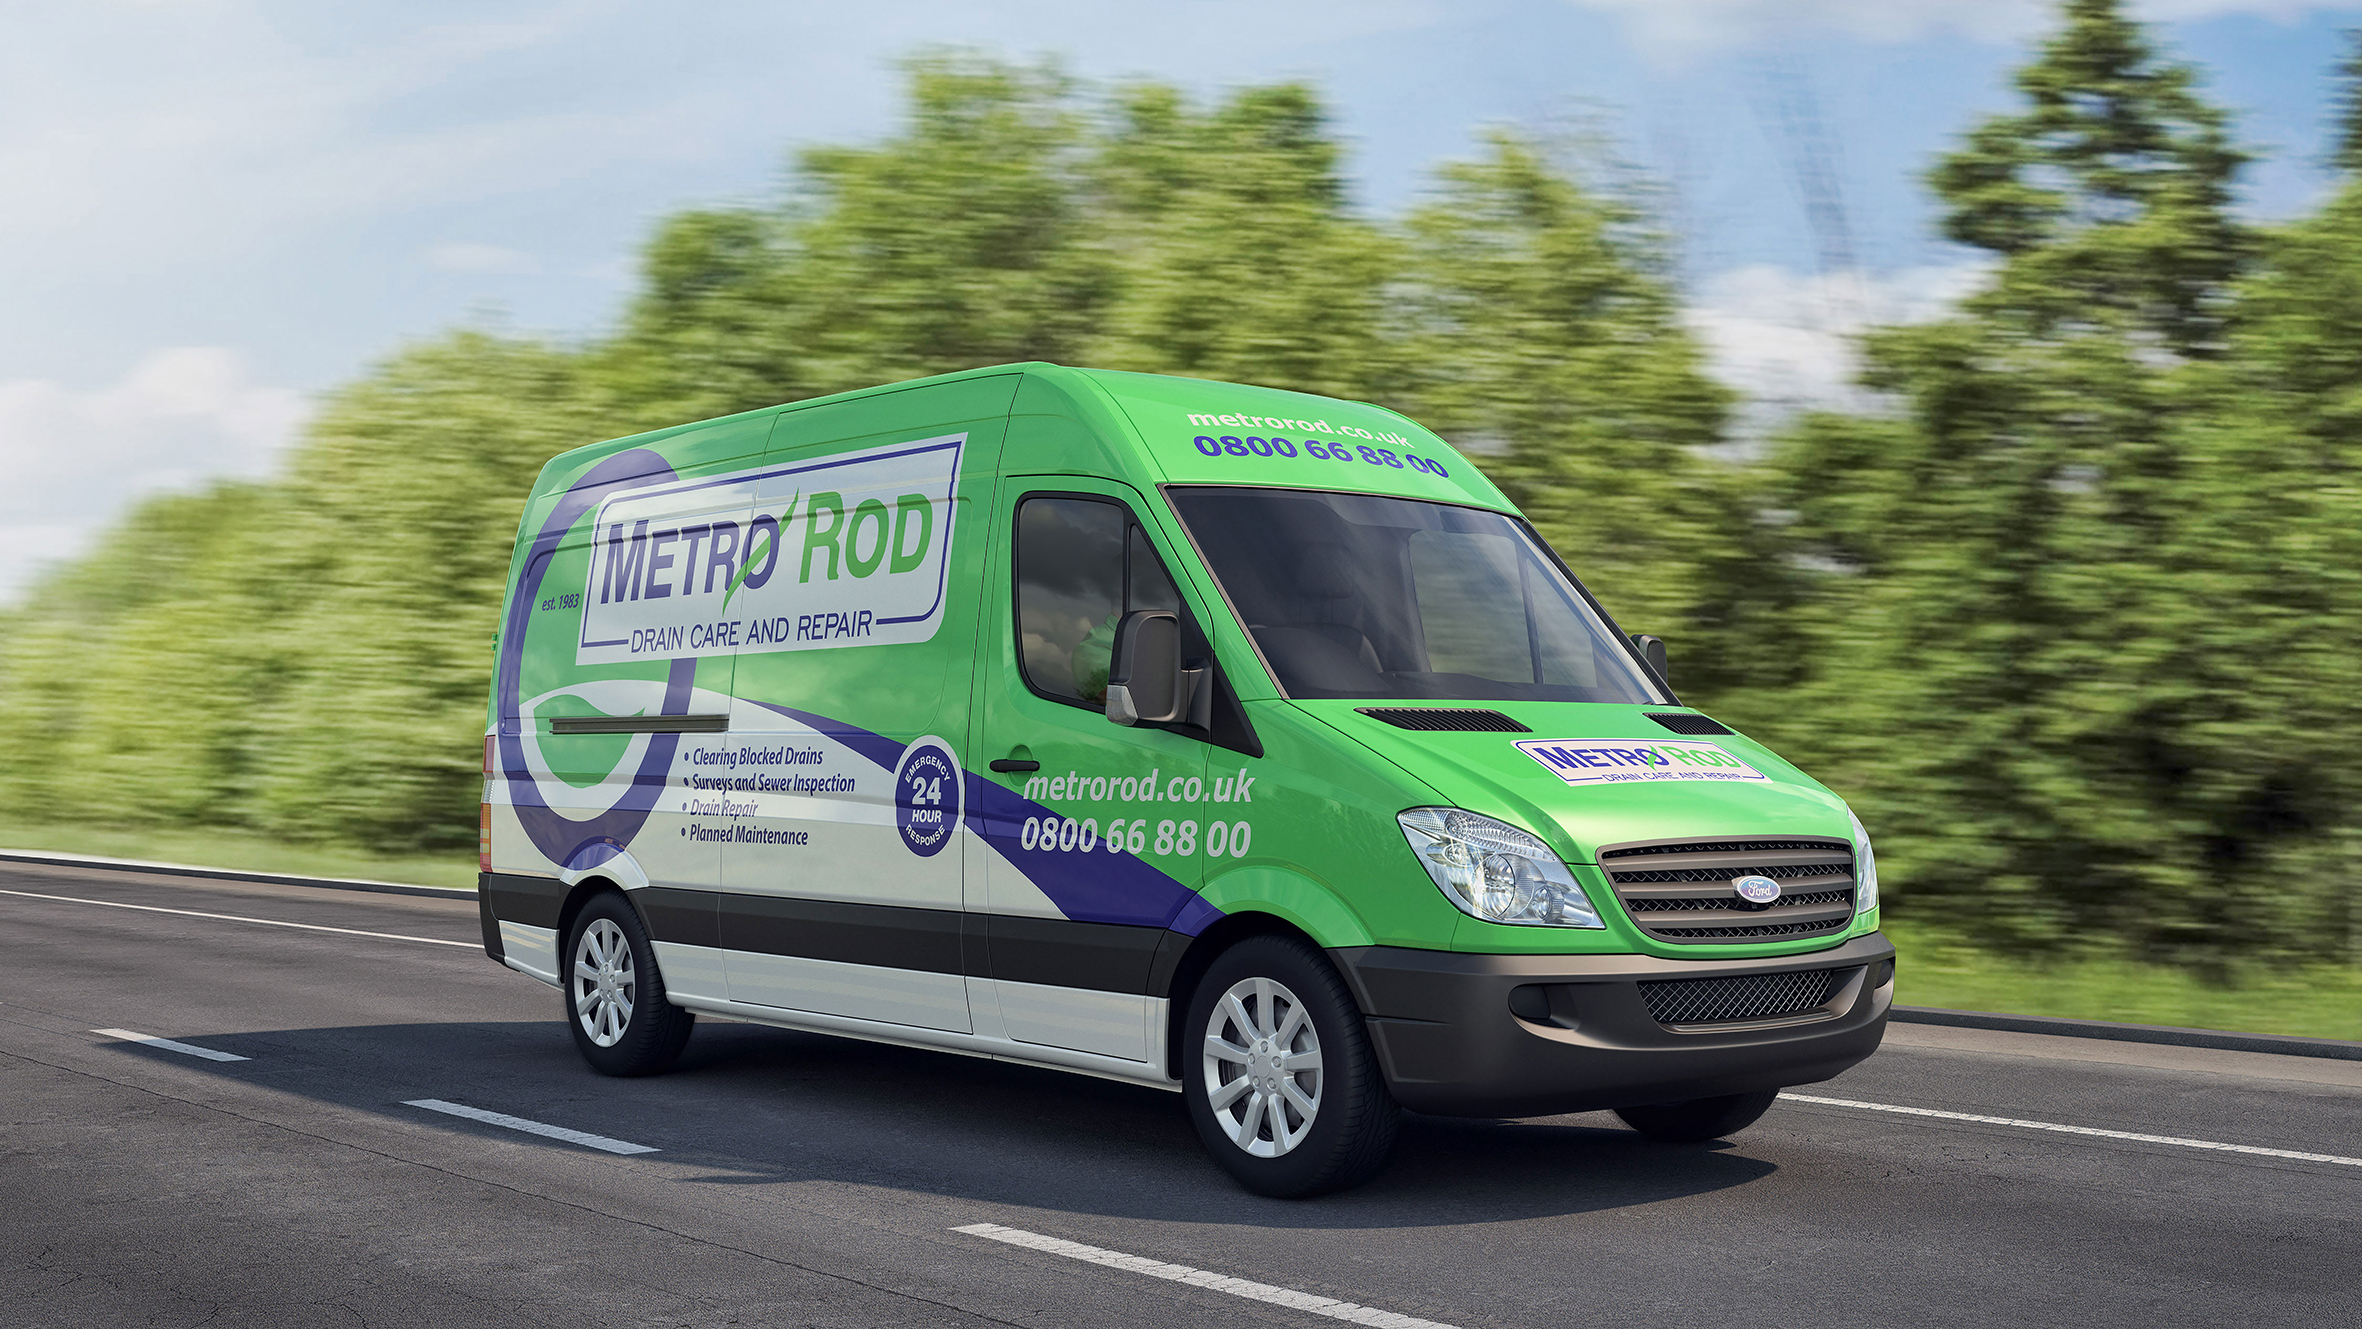 HOW CAN METRO ROD CUMBRIA CAN HELP REOPEN YOUR BUSINESS?